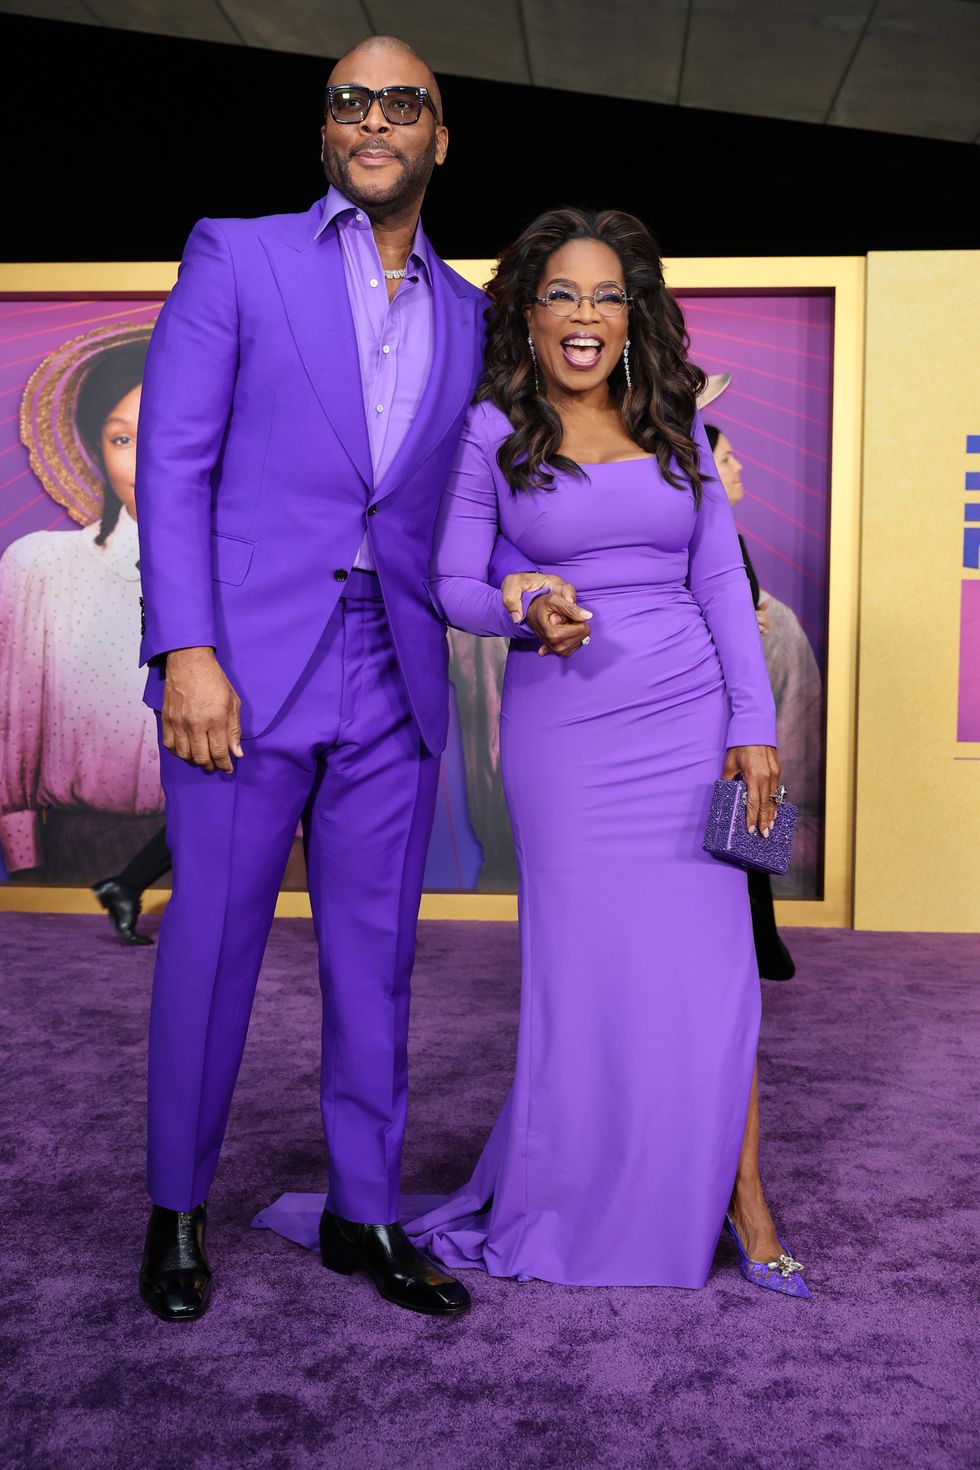 Tyler Perry and Oprah Winfrey at The Color Purple premiere